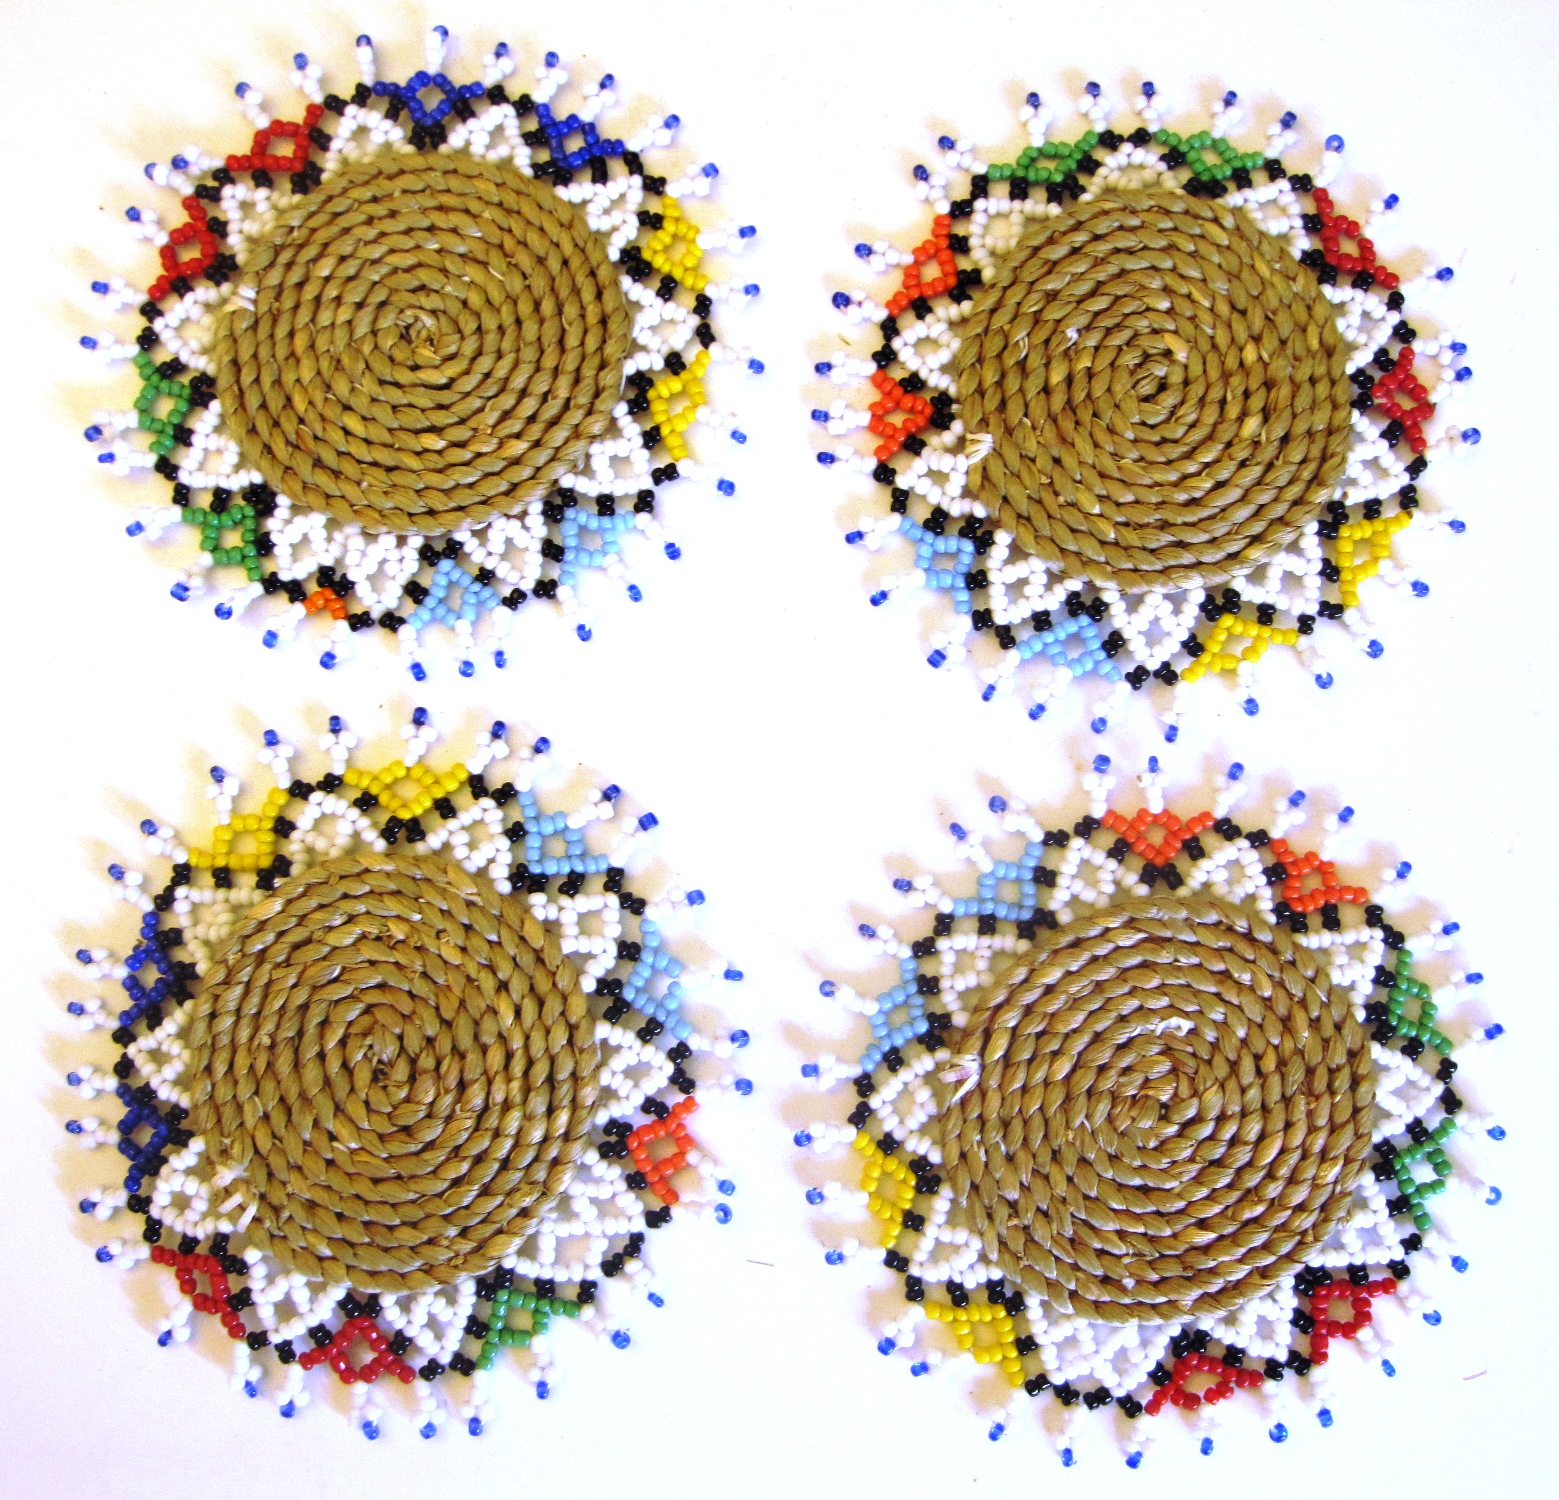 Ndebele Grass & Bead Coasters - Multicolor - Set of 4